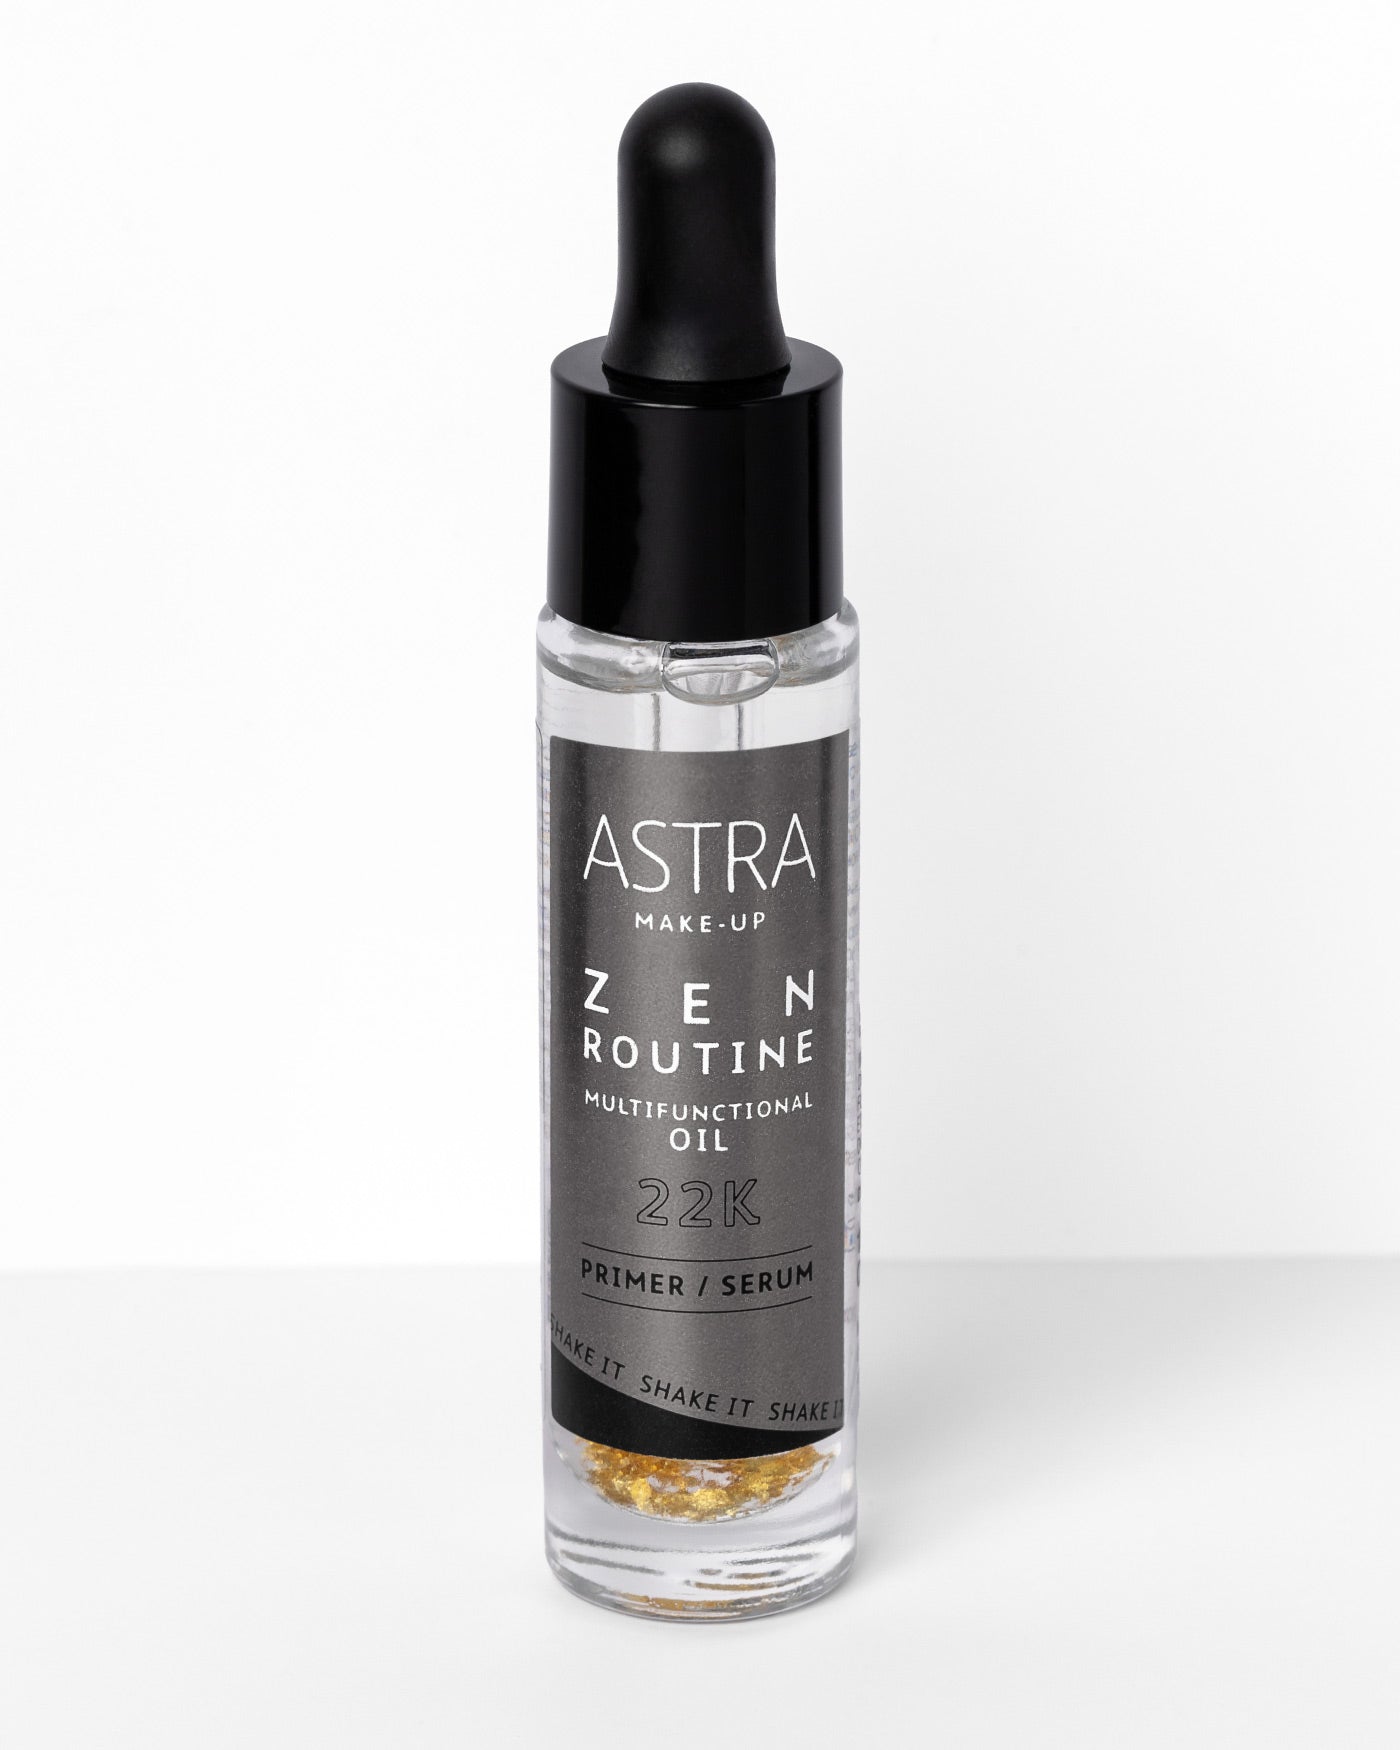 ZEN ROUTINE MULTIFUNCTIONAL OIL - Face - Astra Make-Up